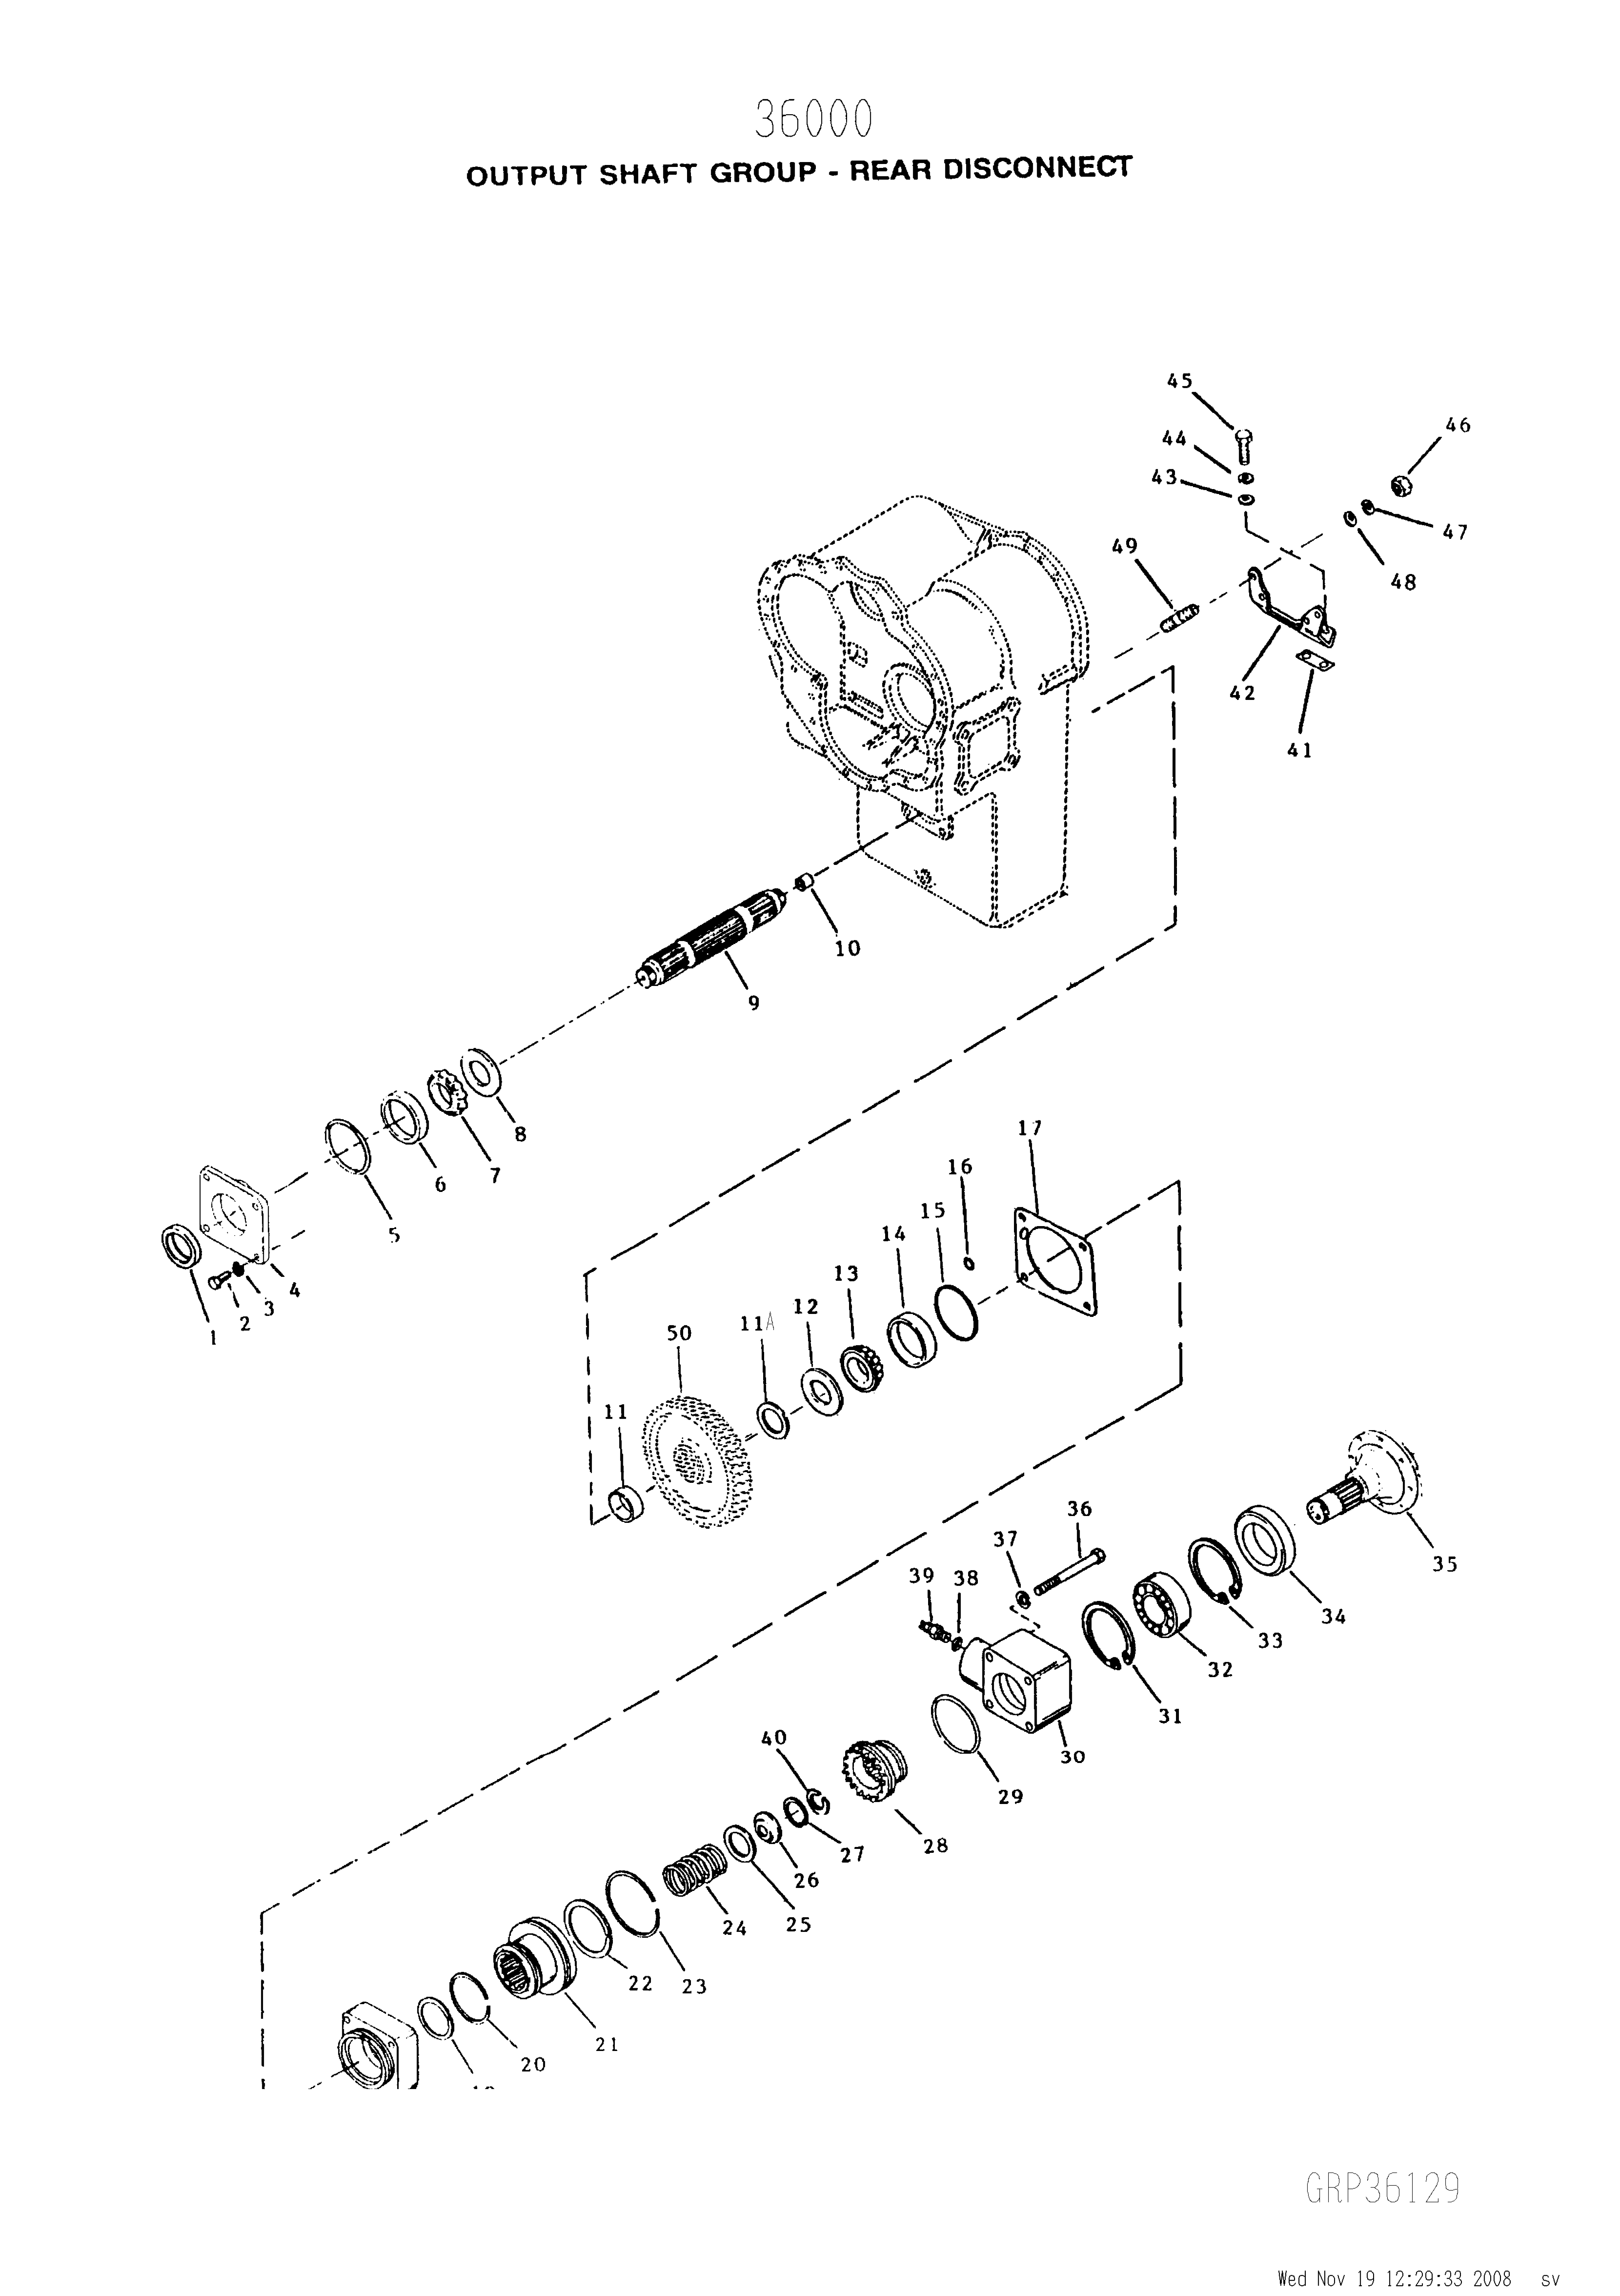 drawing for BRODERSON MANUFACTURING 0-108-00401 - WASHER (figure 1)